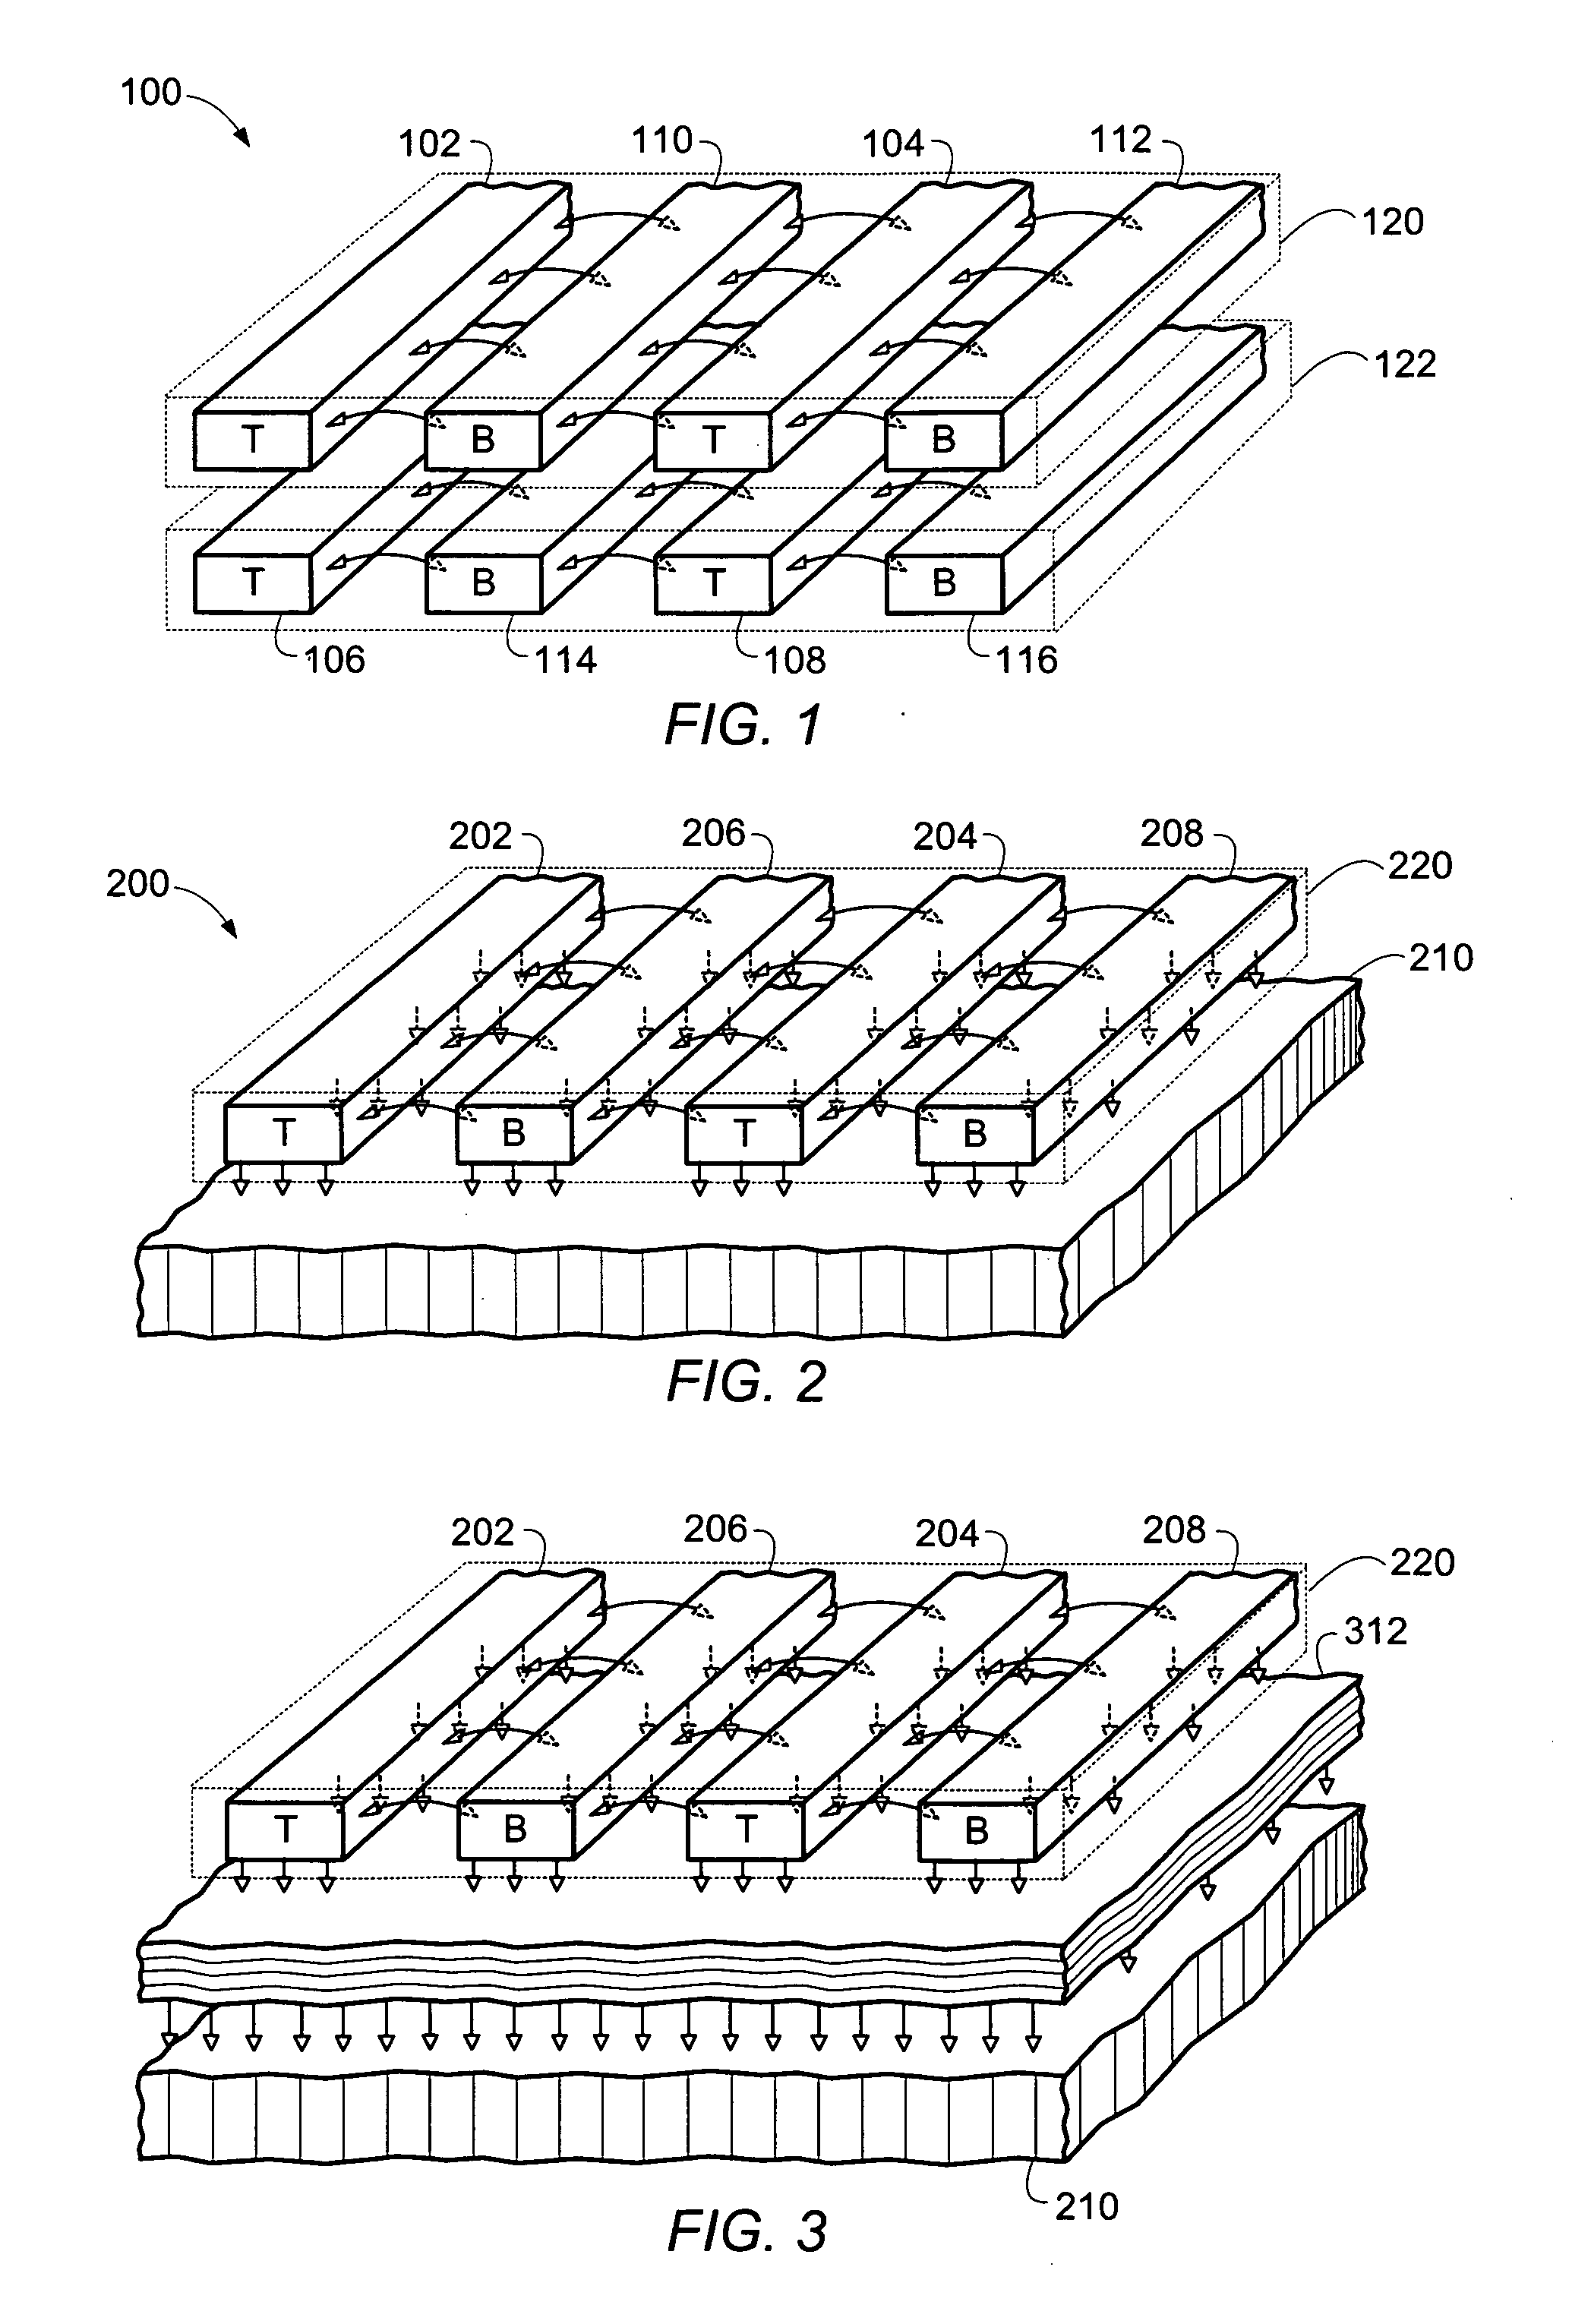 Fringe capacitor using bootstrapped non-metal layer